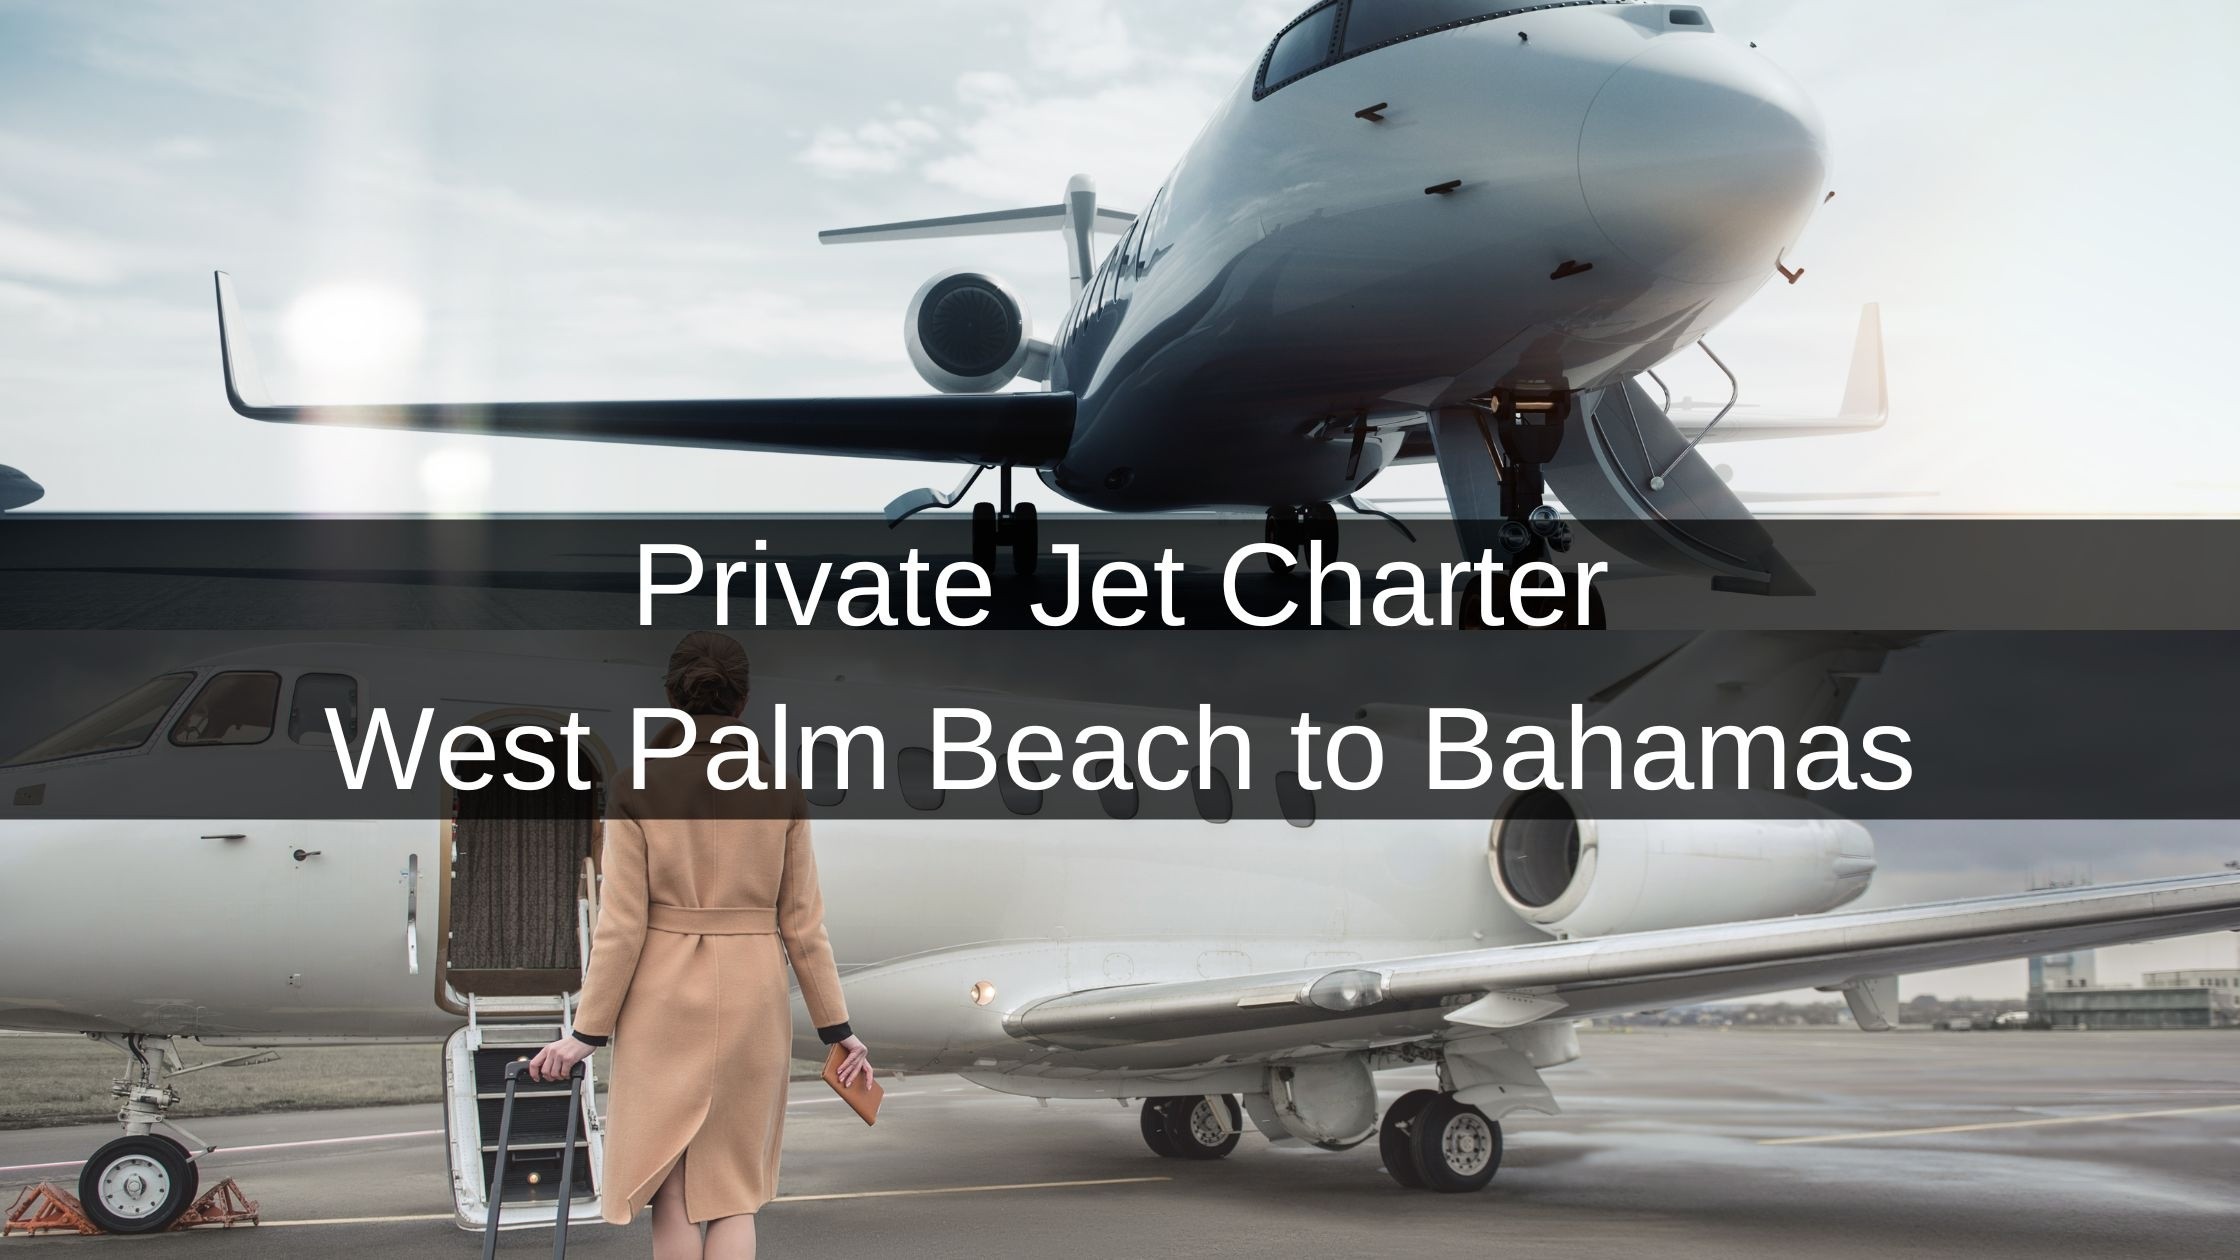 Private Jet Charter from West Palm Beach to the Bahamas